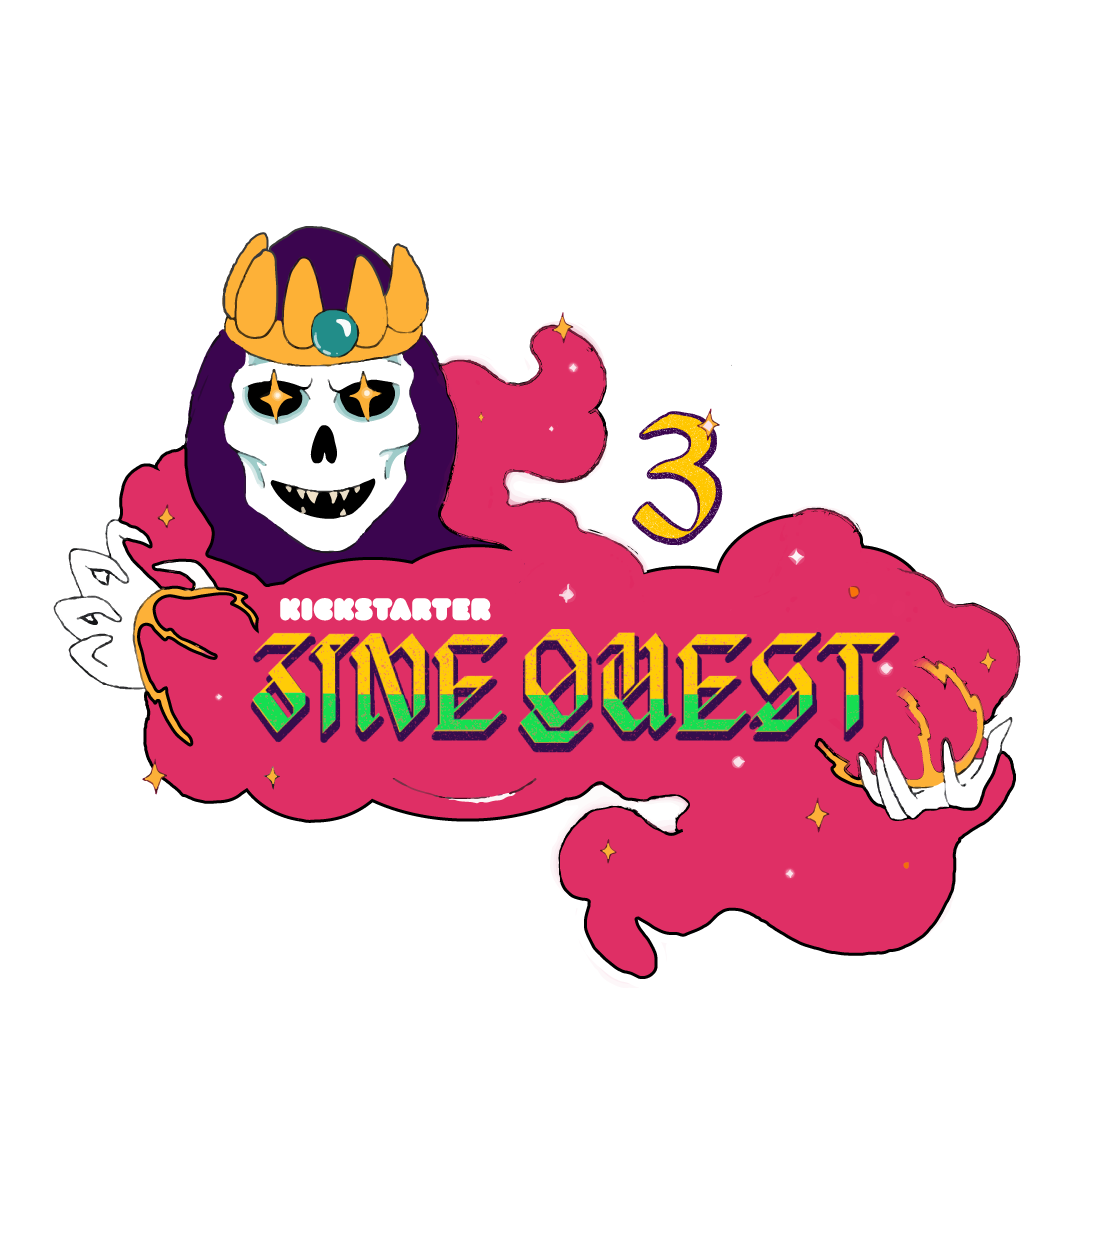 70s-style Lich art with the Zine Quest 3 banner